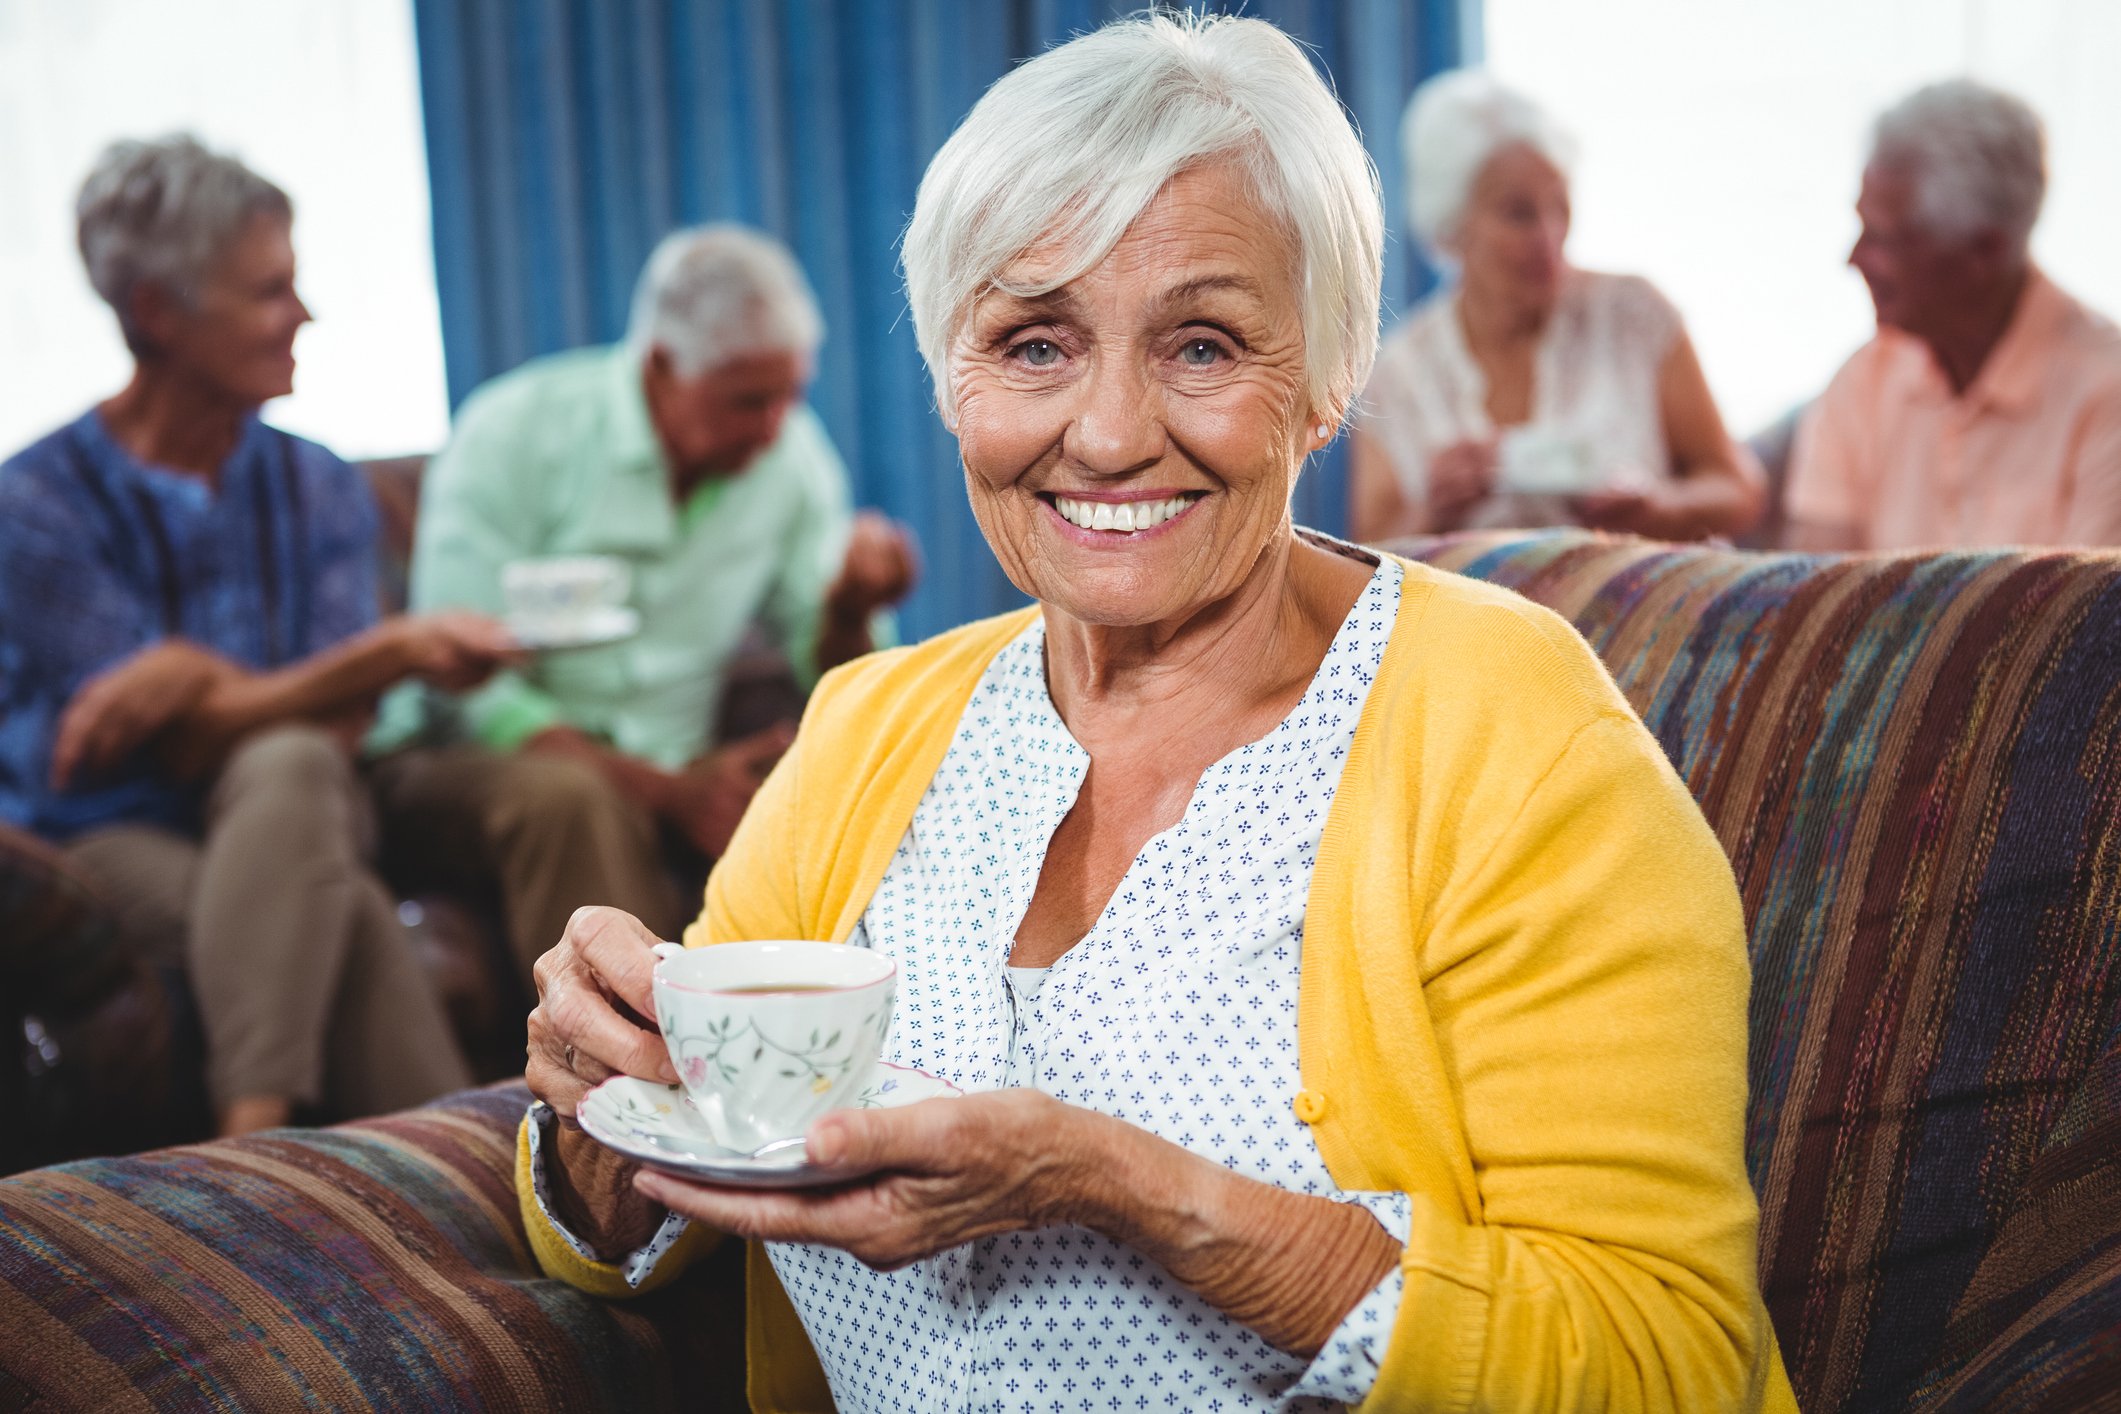 Resident enjoying a cup of coffee in the company of others